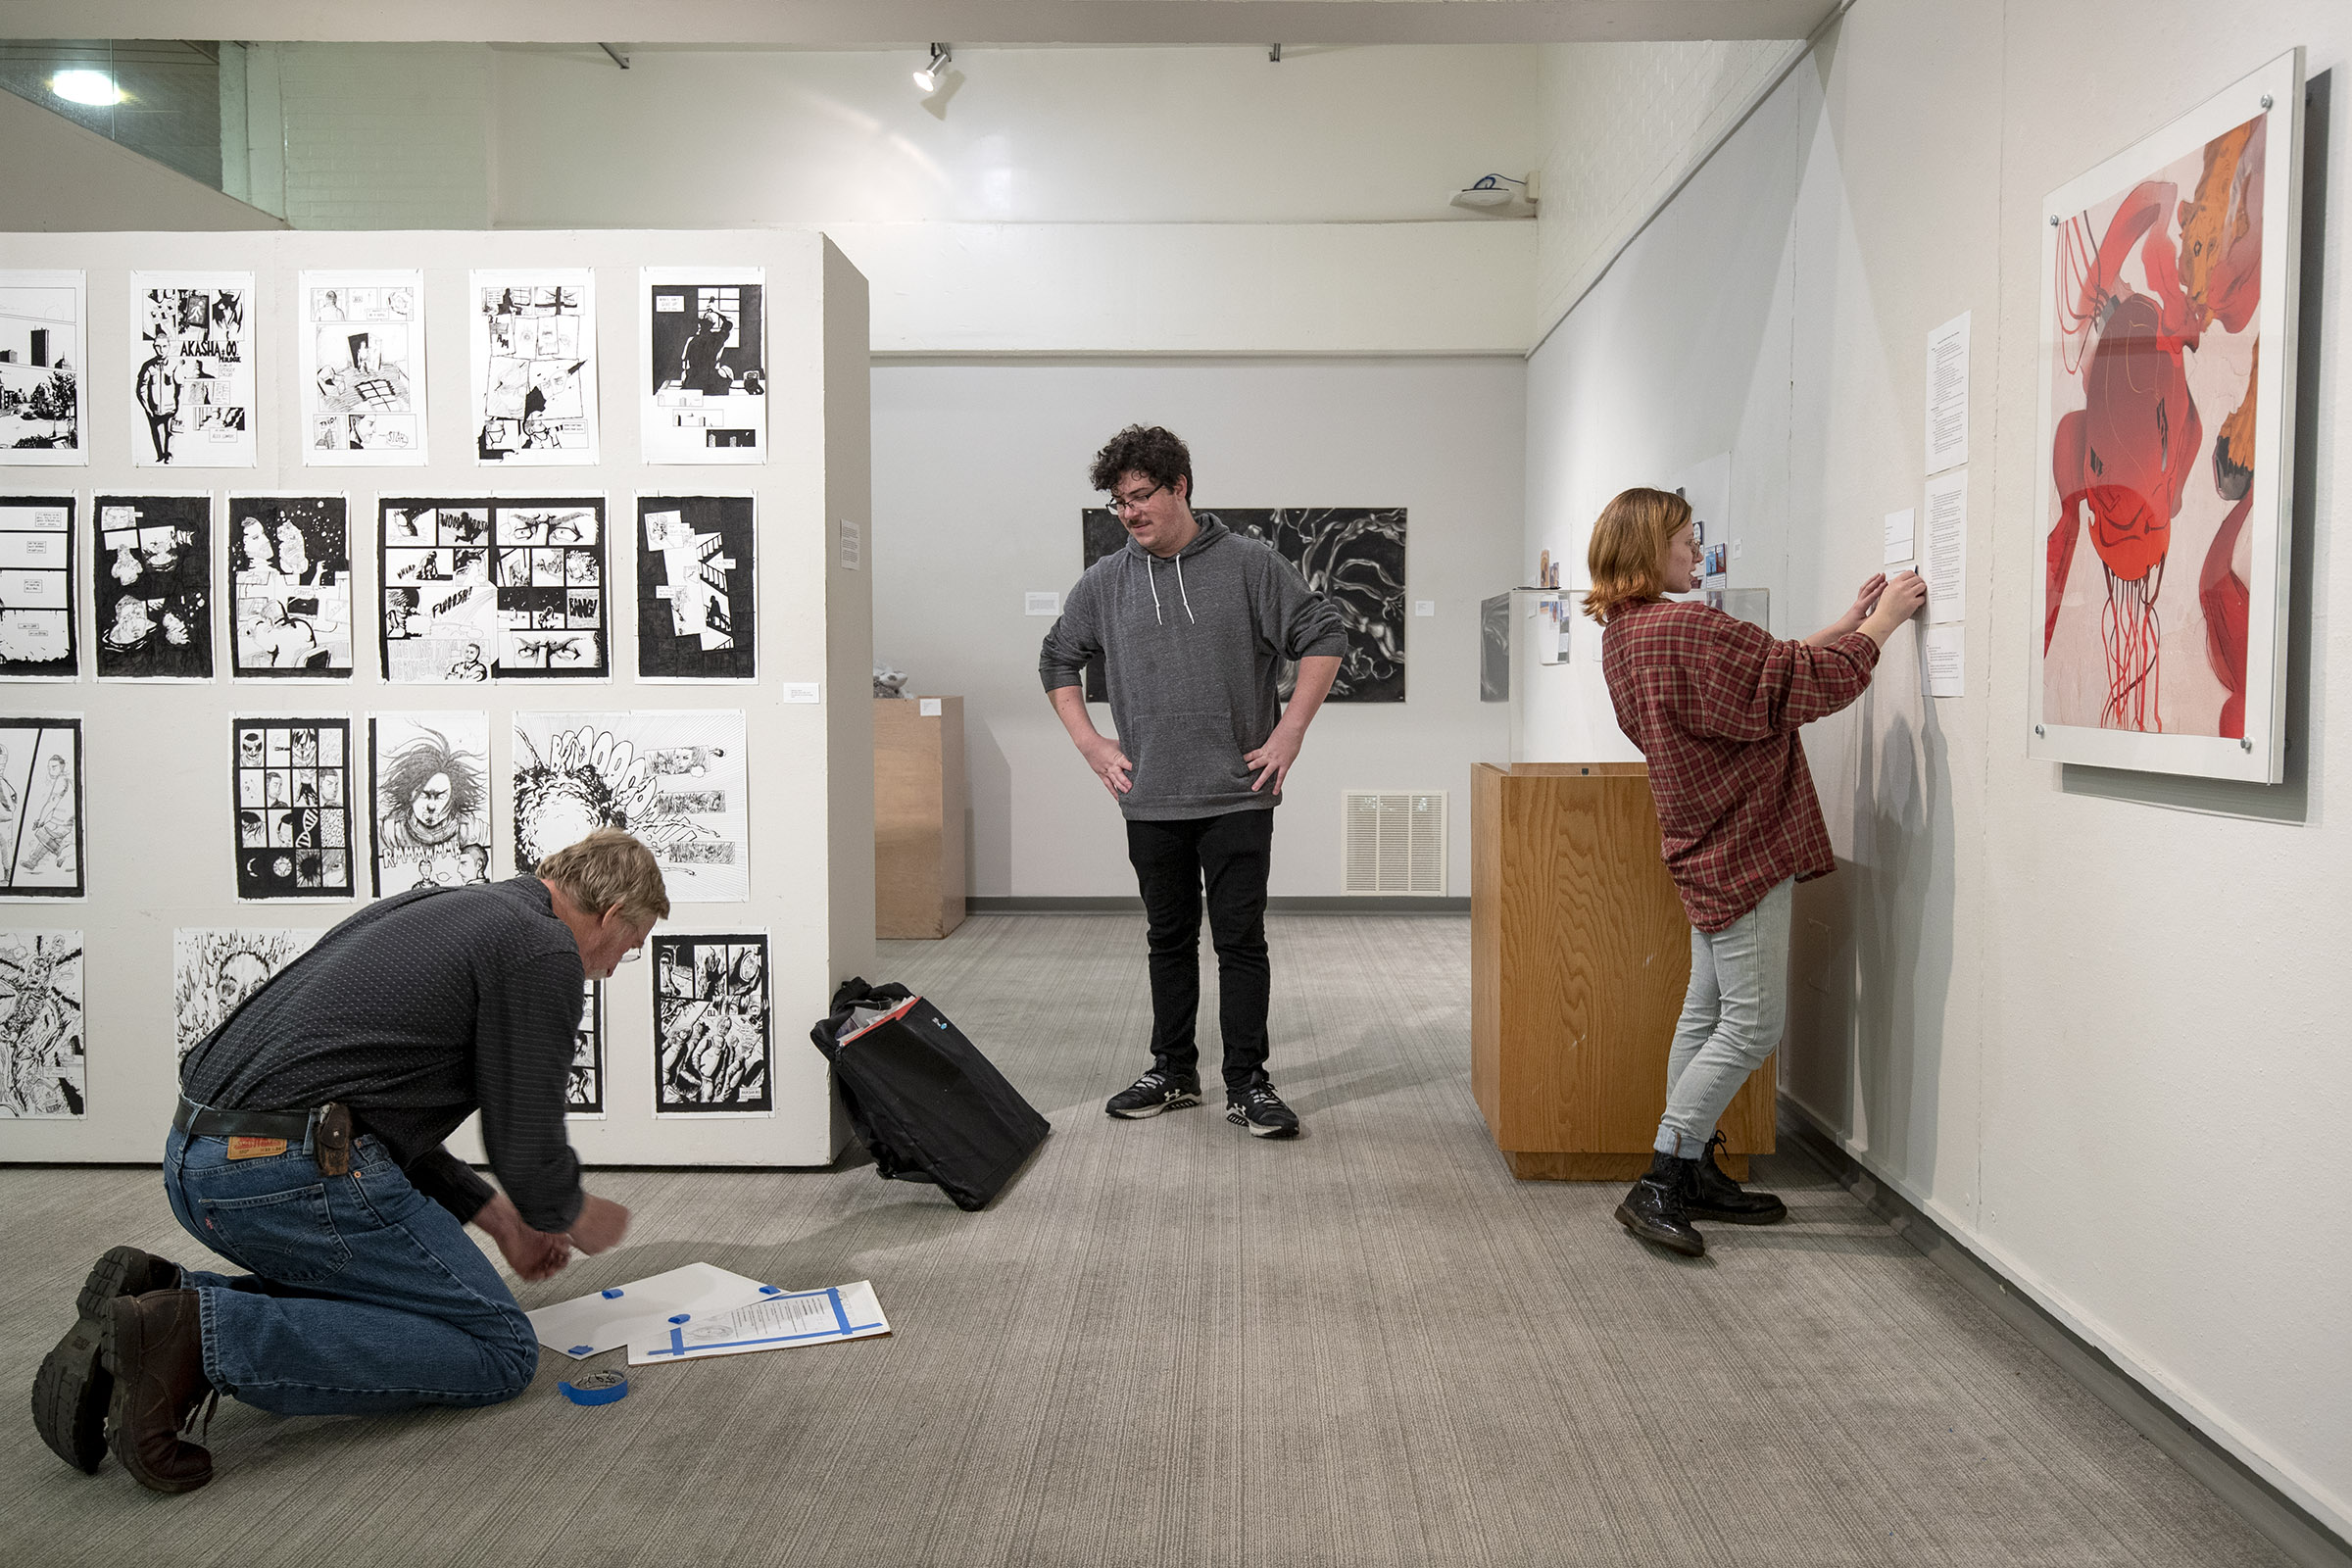 In an art gallery, on the left side, a man working on the ground tapes a piece of paper, while a student stands and watches. Another student on the right side tapes up a piece of paper on the gallery wall.